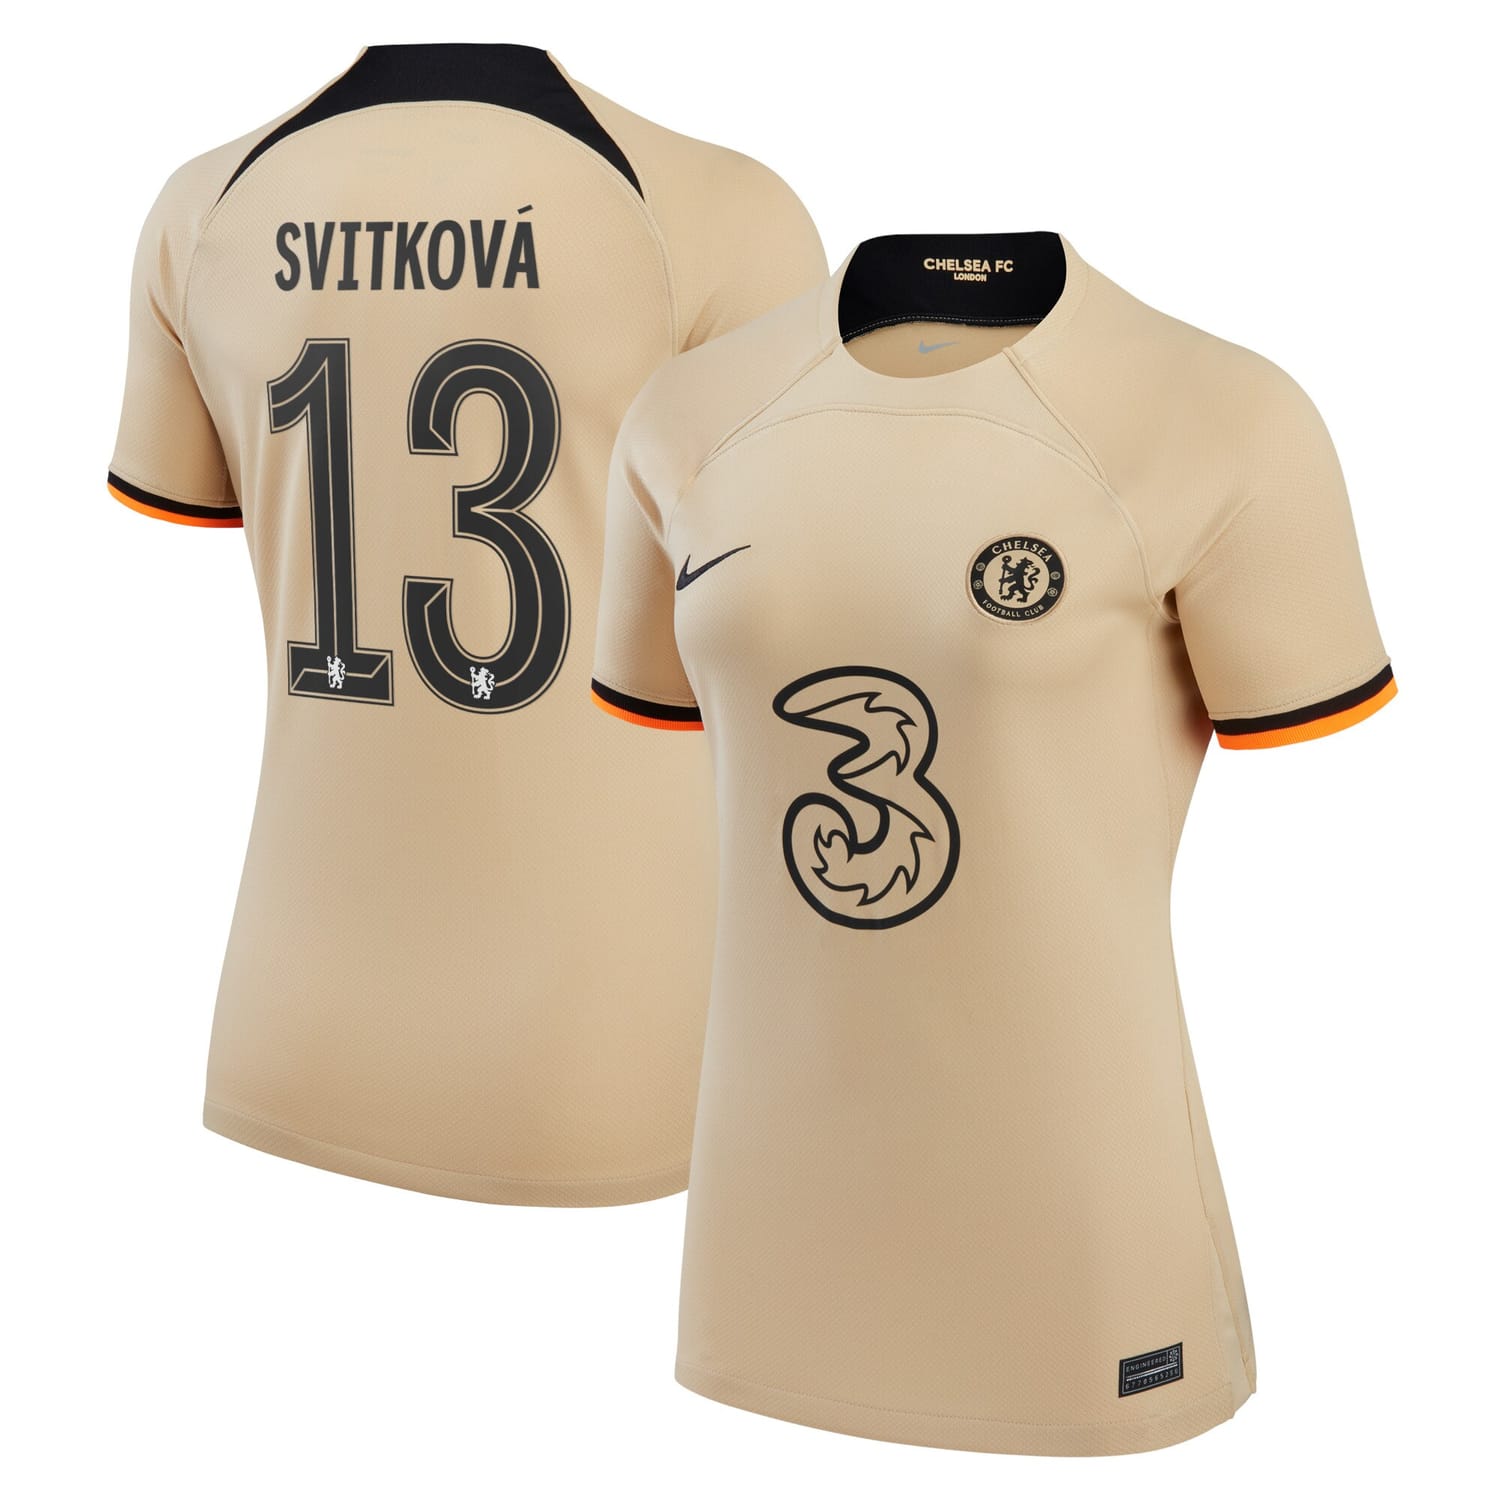 Premier League Chelsea Third Cup Jersey Shirt 2022-23 player Katerina Svitková 13 printing for Women